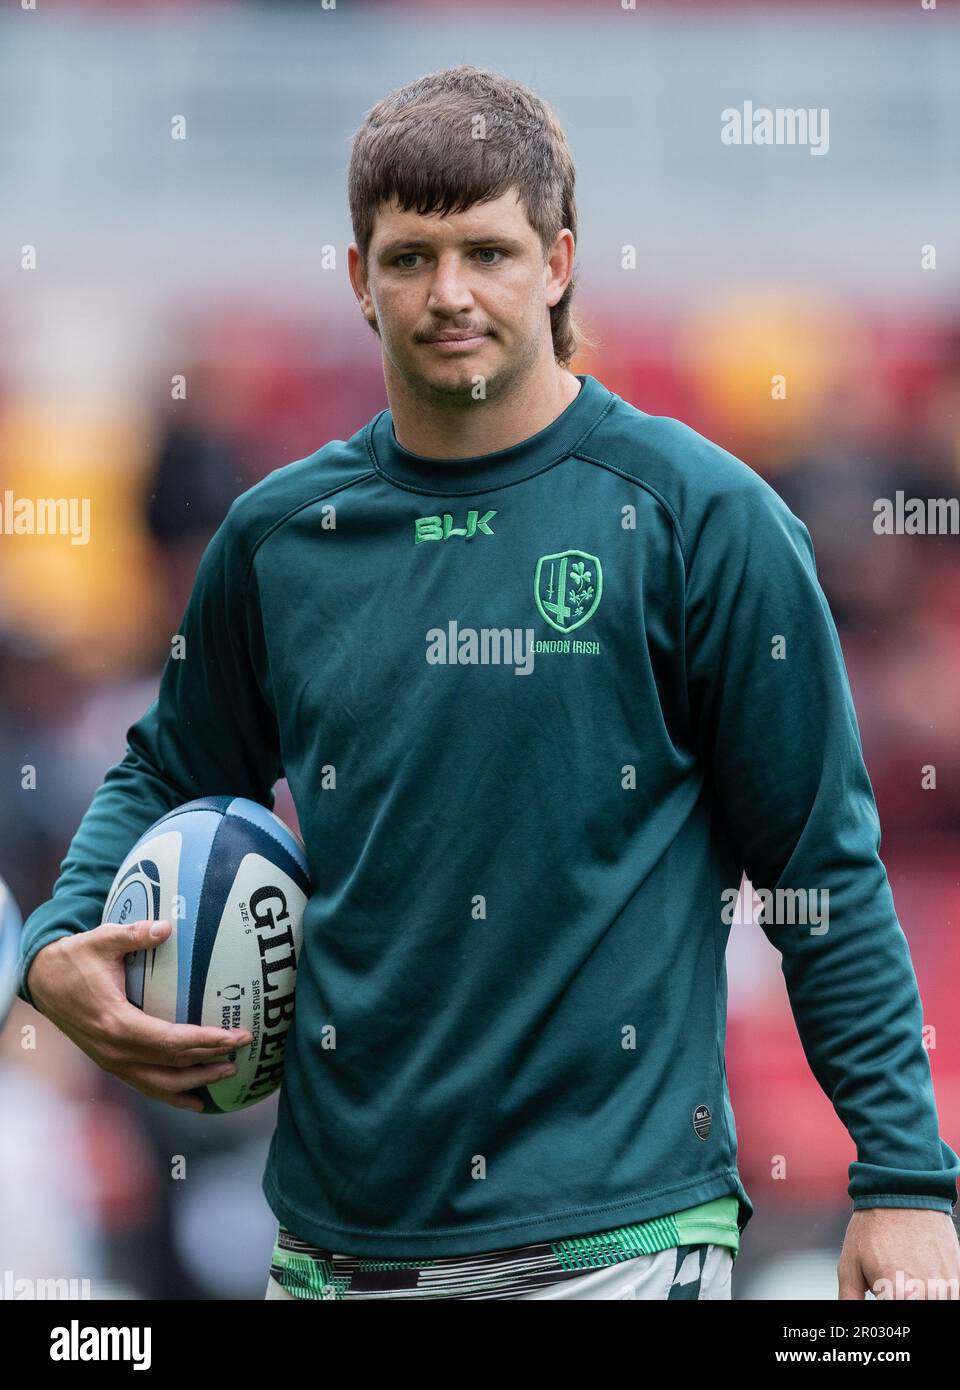 Bernhard van Rensburg of London Irish ahead of the Gallagher Premiership Rugby match between London Irish and Exeter Chiefs at Gtech Community Stadium, London, England on 6 May 2023